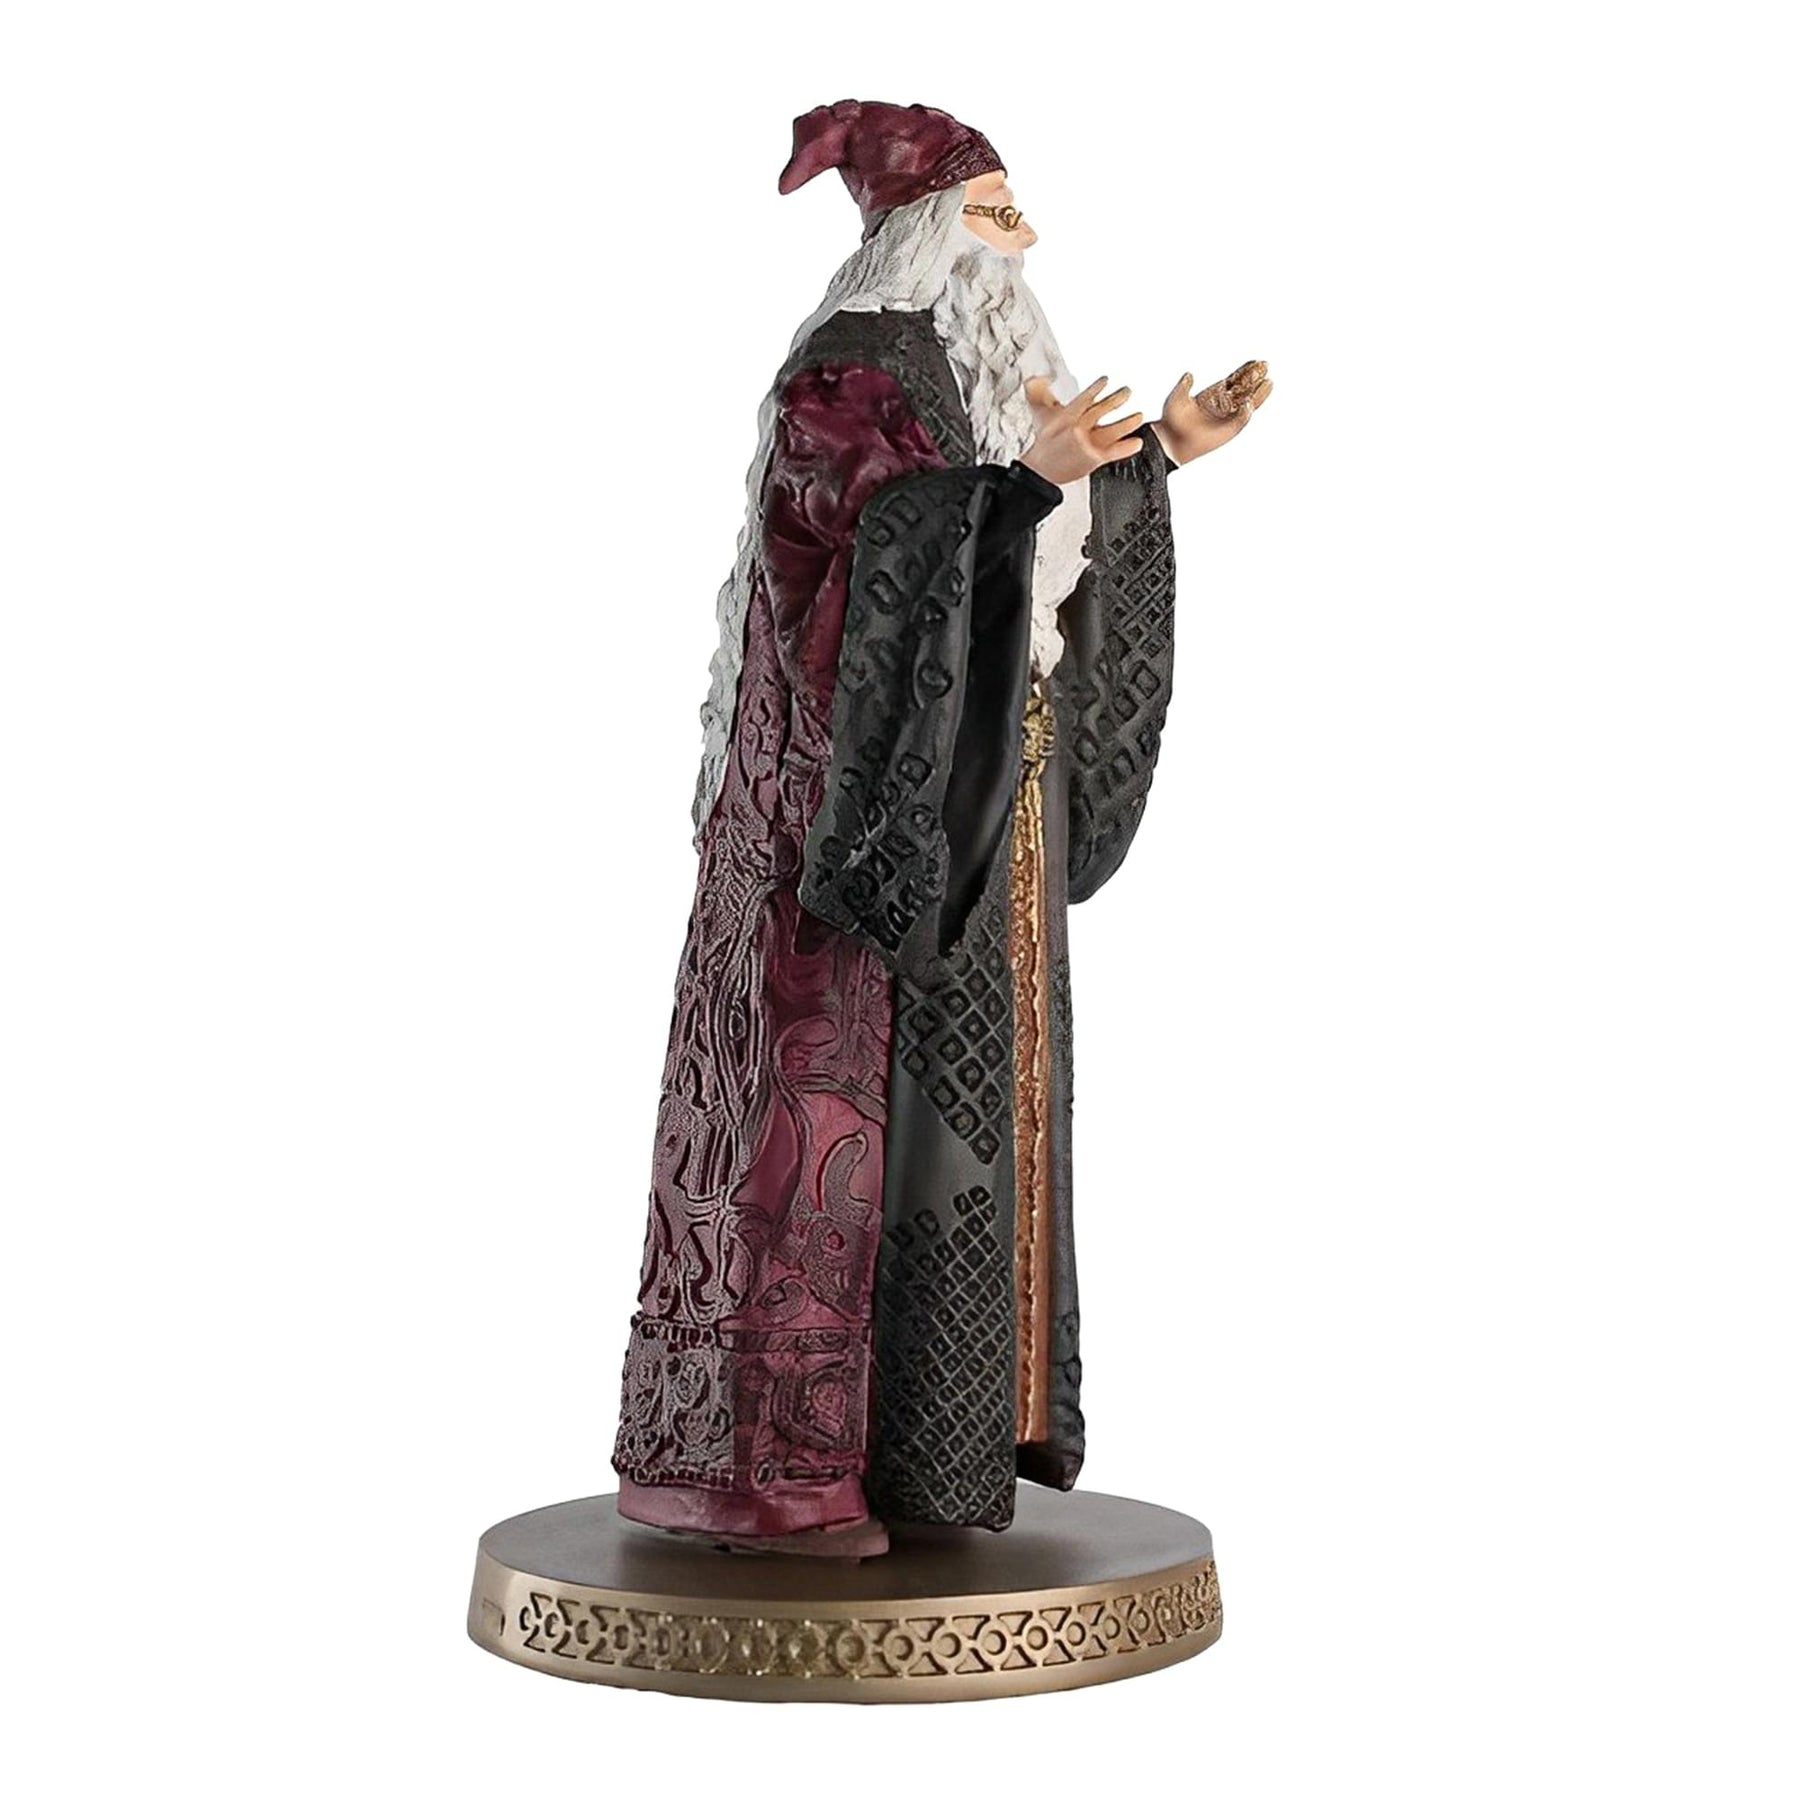 Harry Potter - Figurine Wizarding World Collection 1/16 Year 1 10